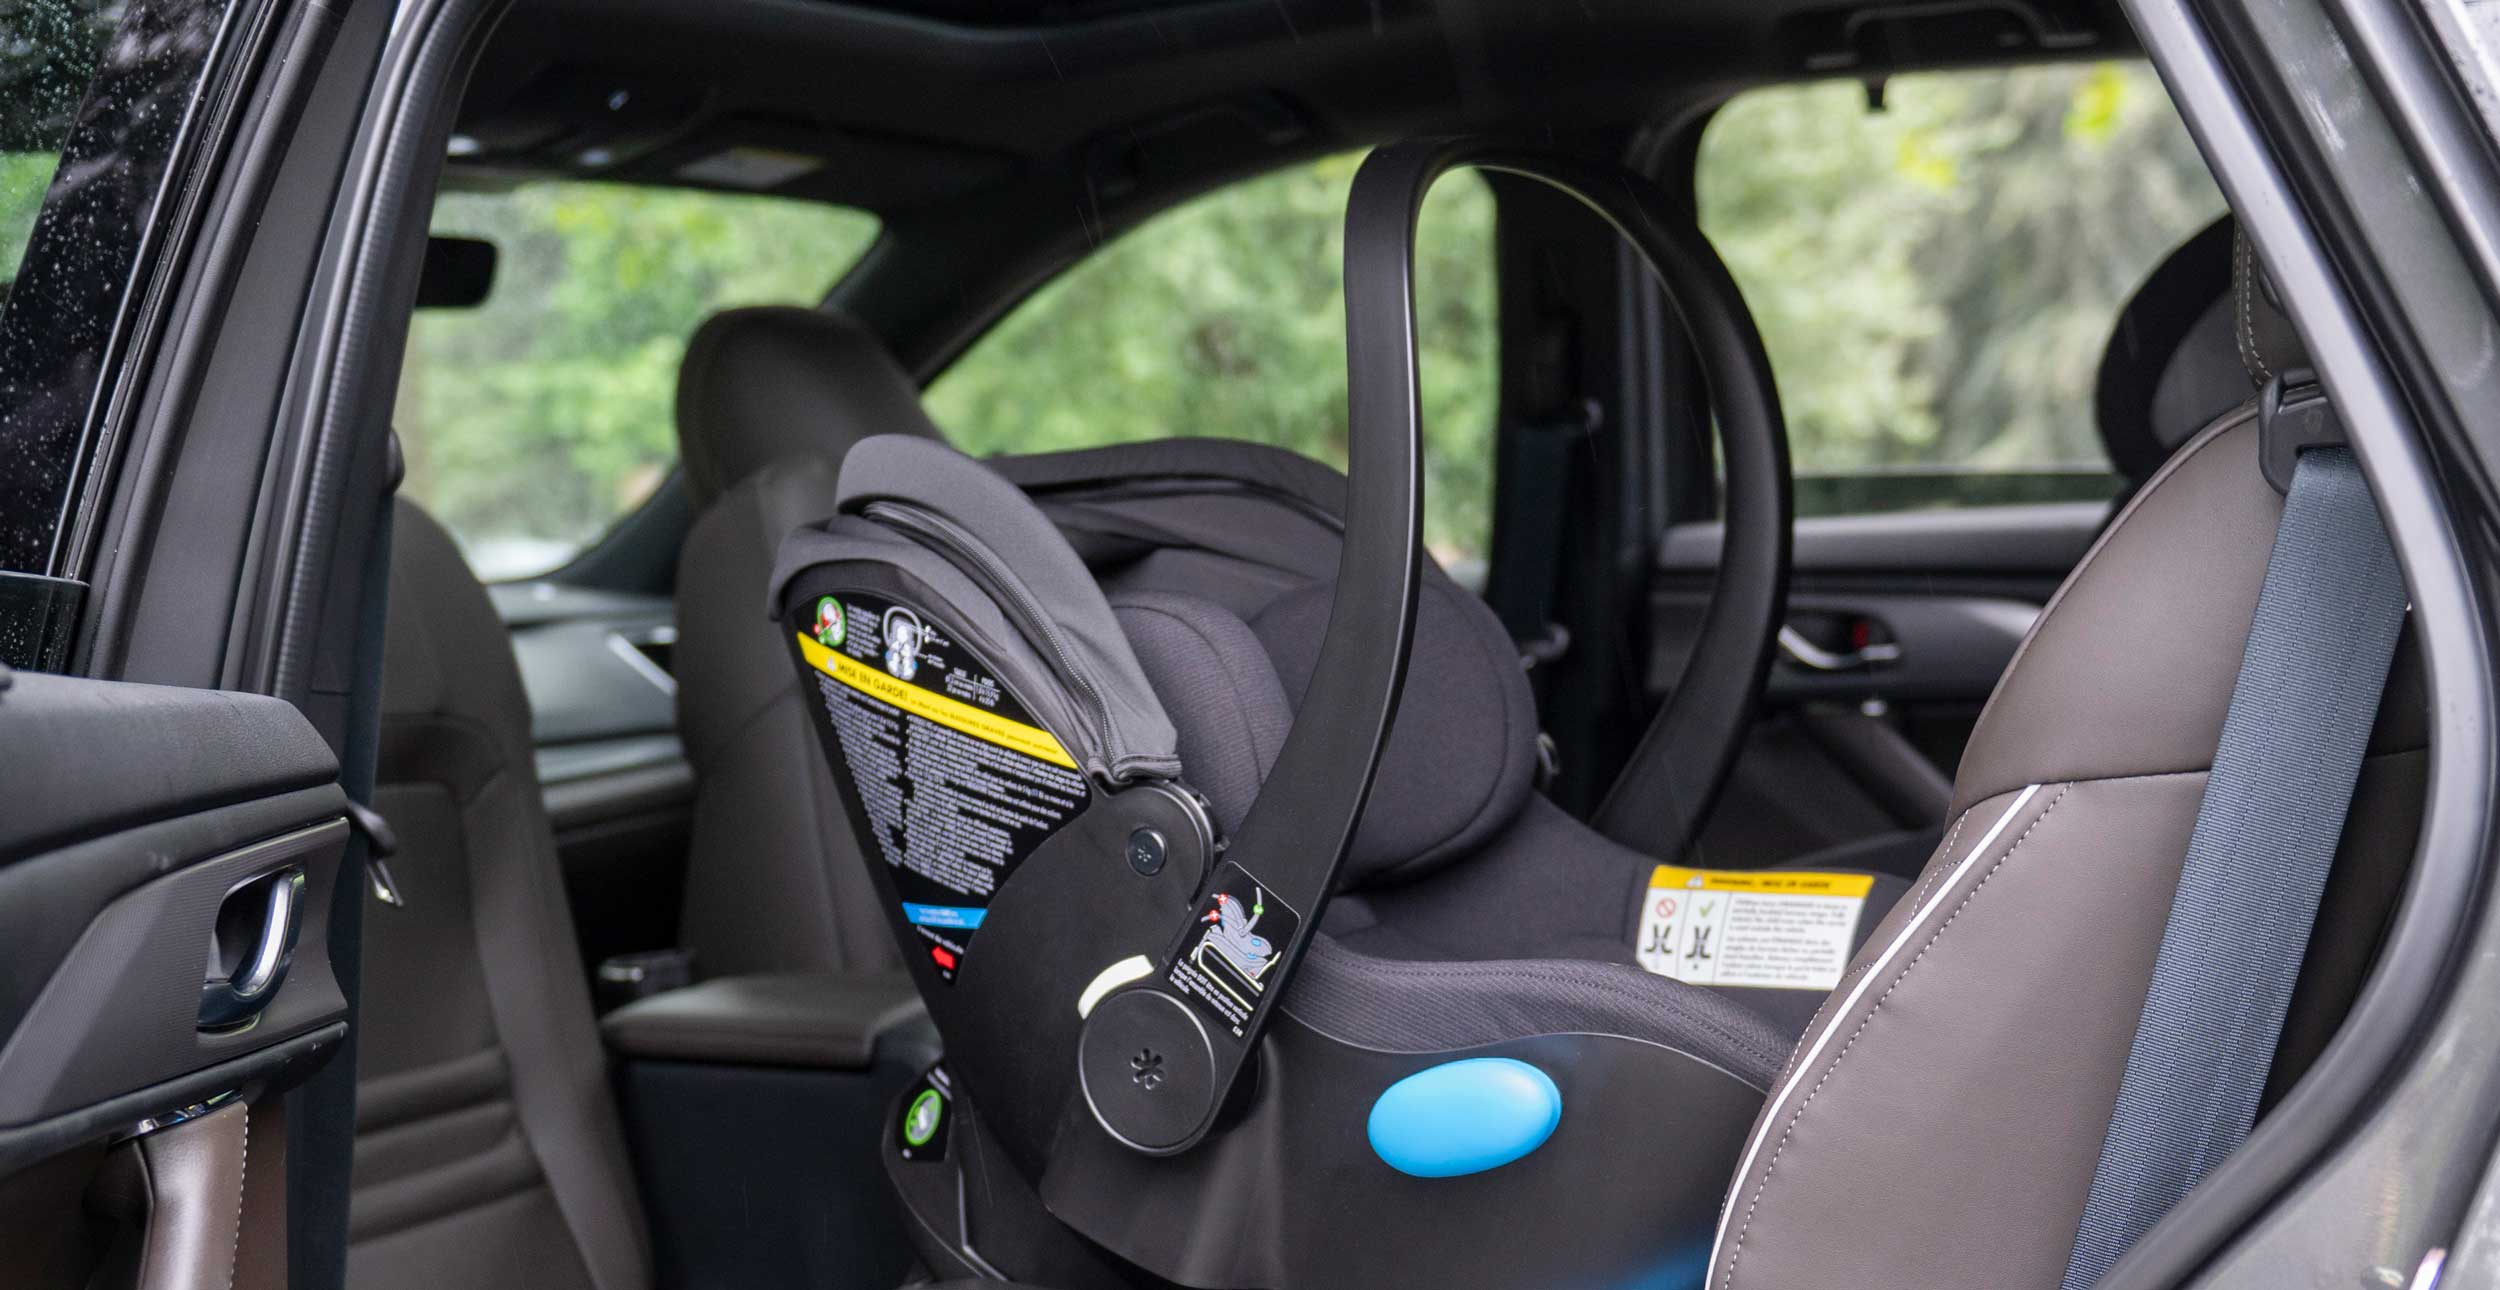 Clek Liing infant car seat in railroad flame-retardant free fabric installed in an SUV